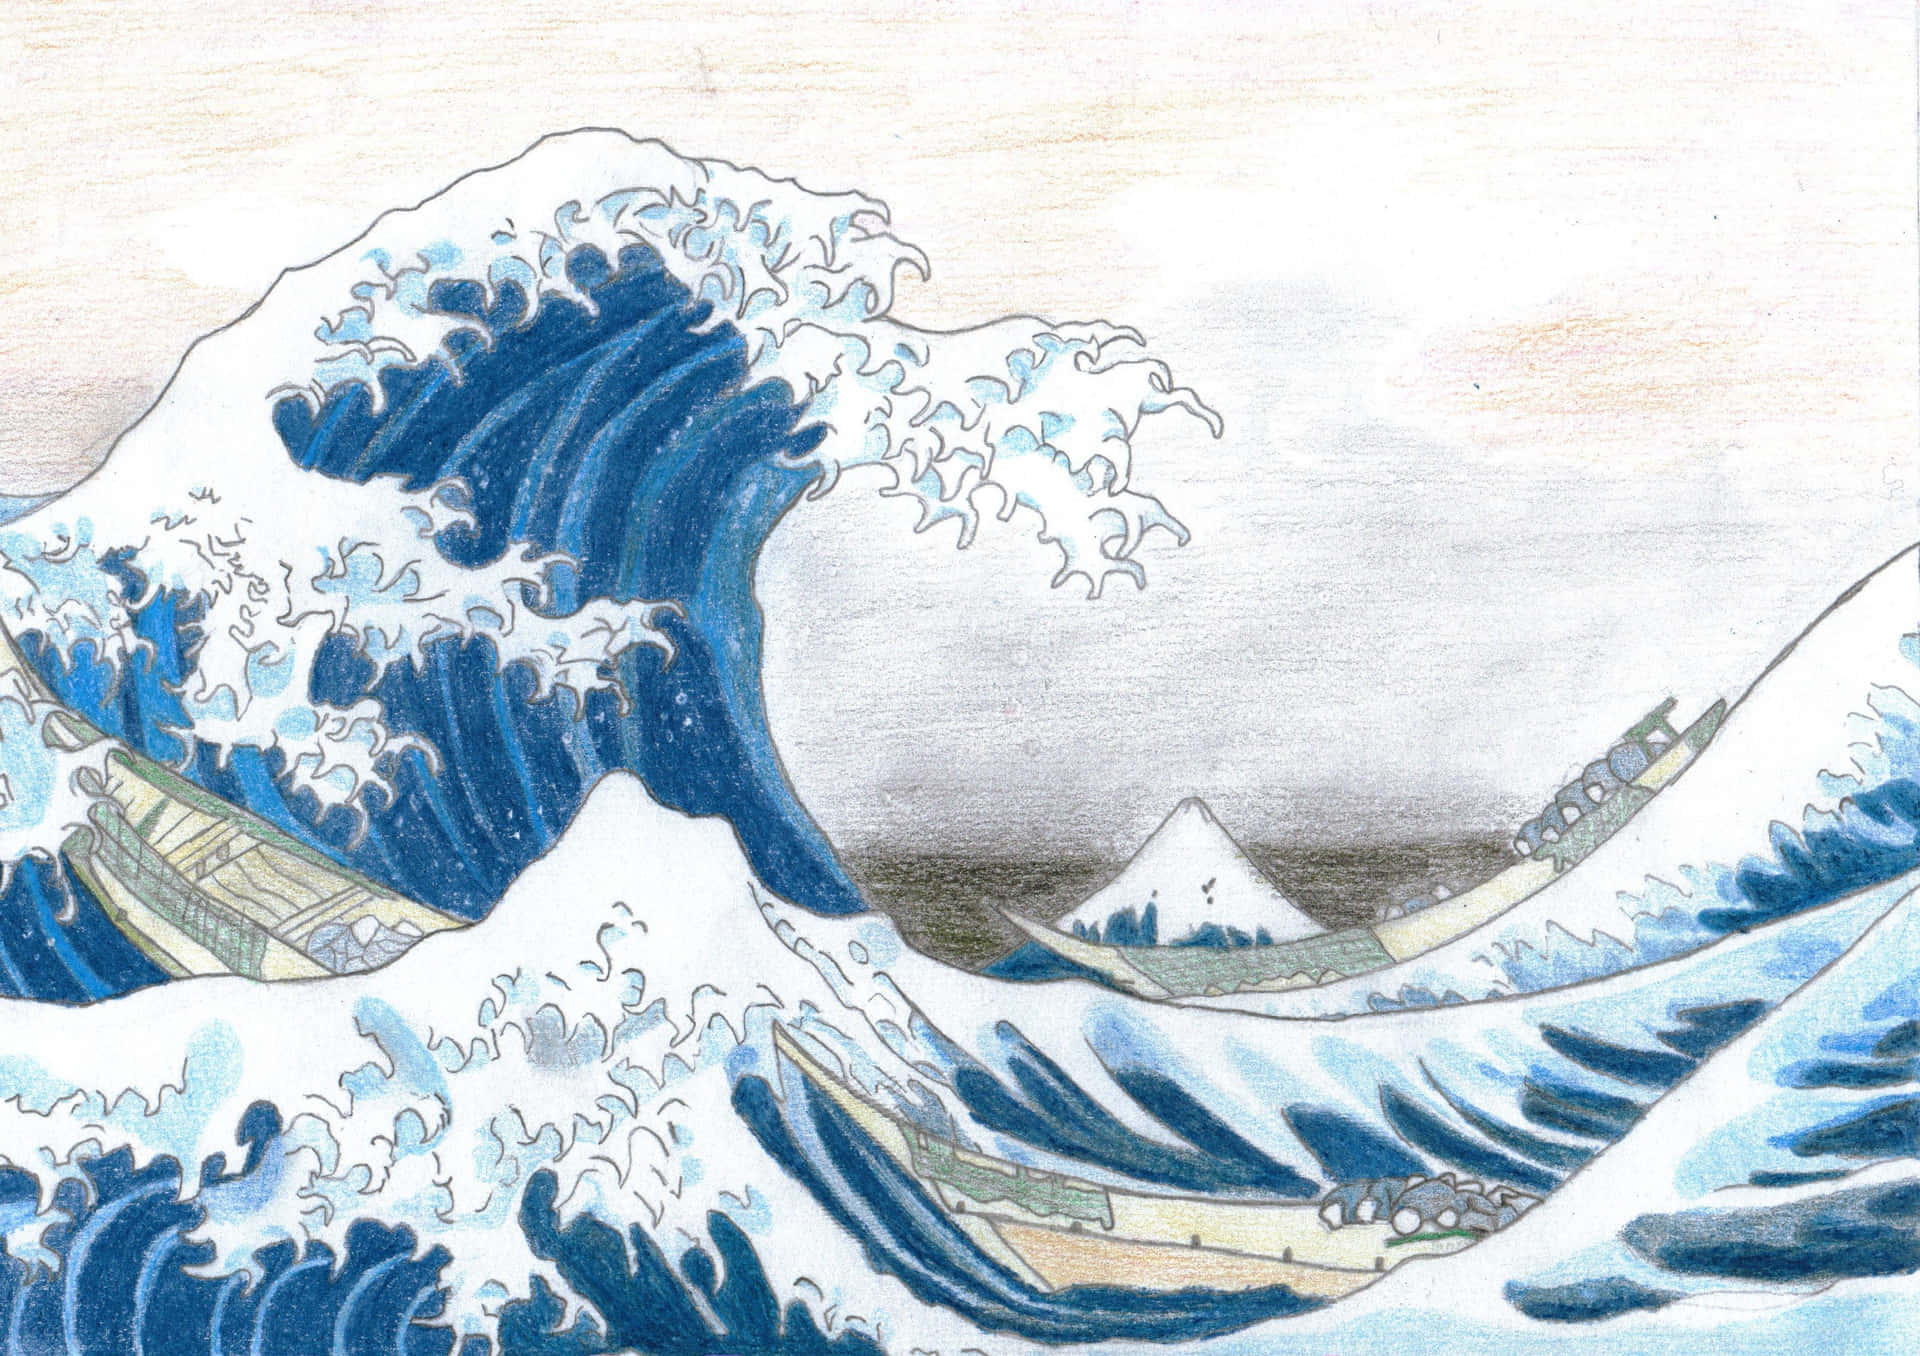 The Great Wave Storm-tossed Sea Background